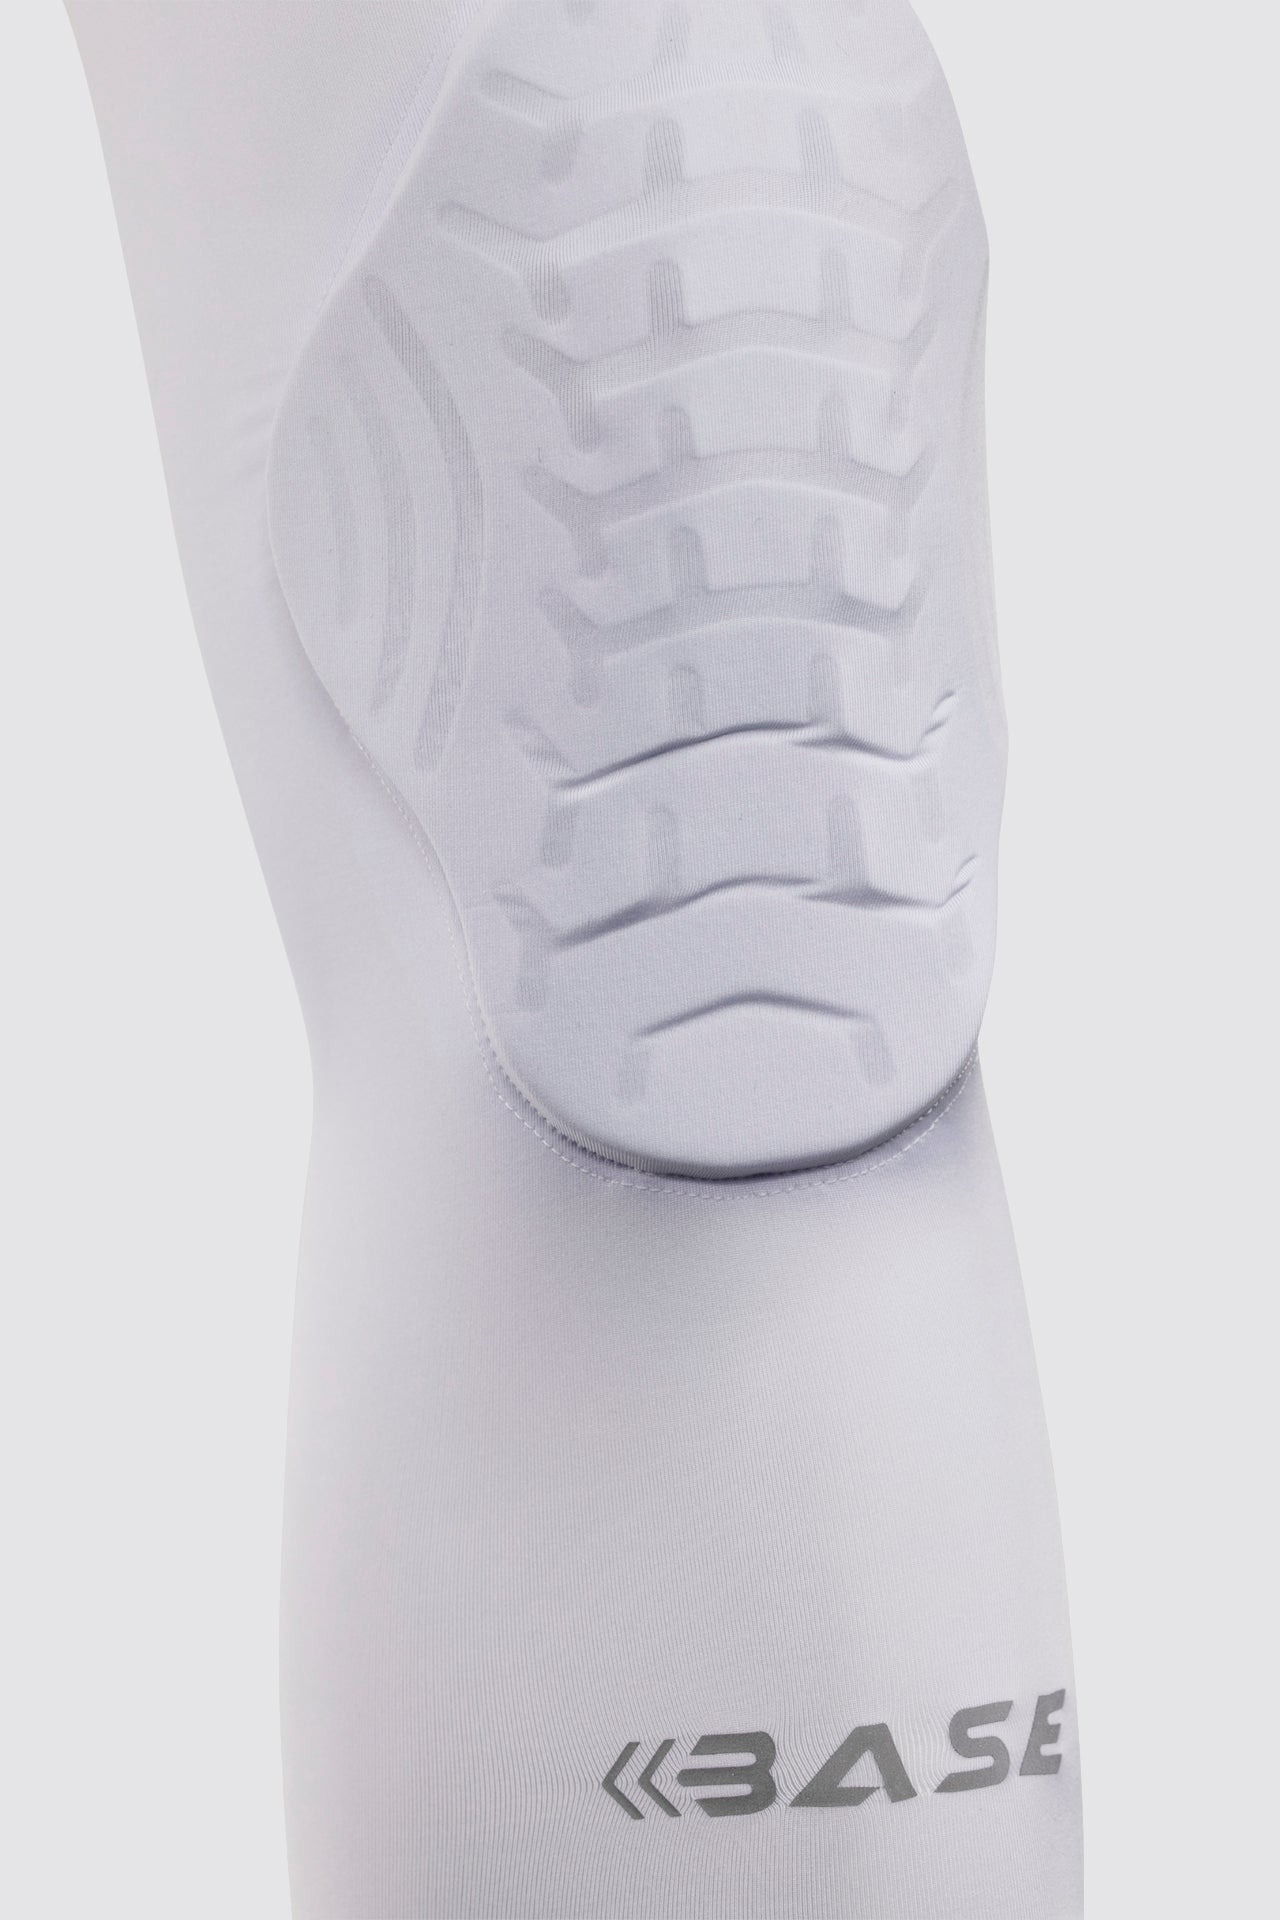 BASE Compression Padded Knee Guard - White